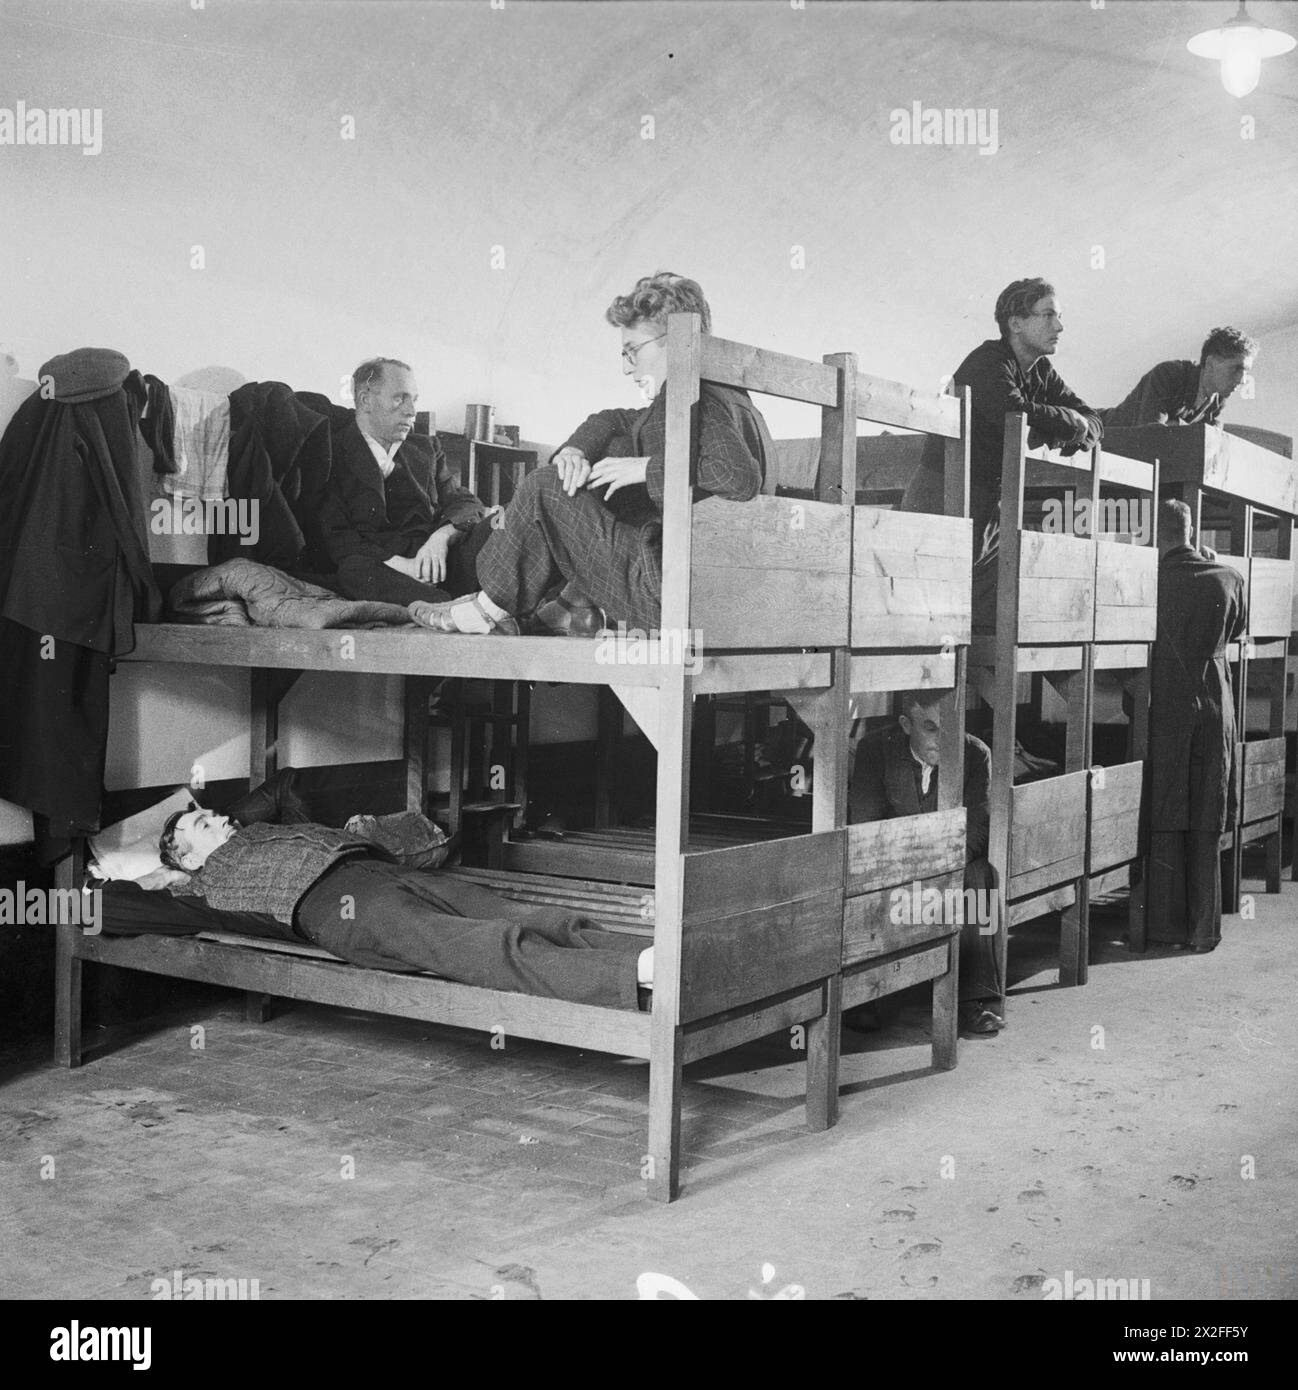 NAZI PERSECUTION - Gestapo interrogation and detention centre at Breedonck in Belgium: Dormitory accommodation for transit prisoners at Breedonck Stock Photo